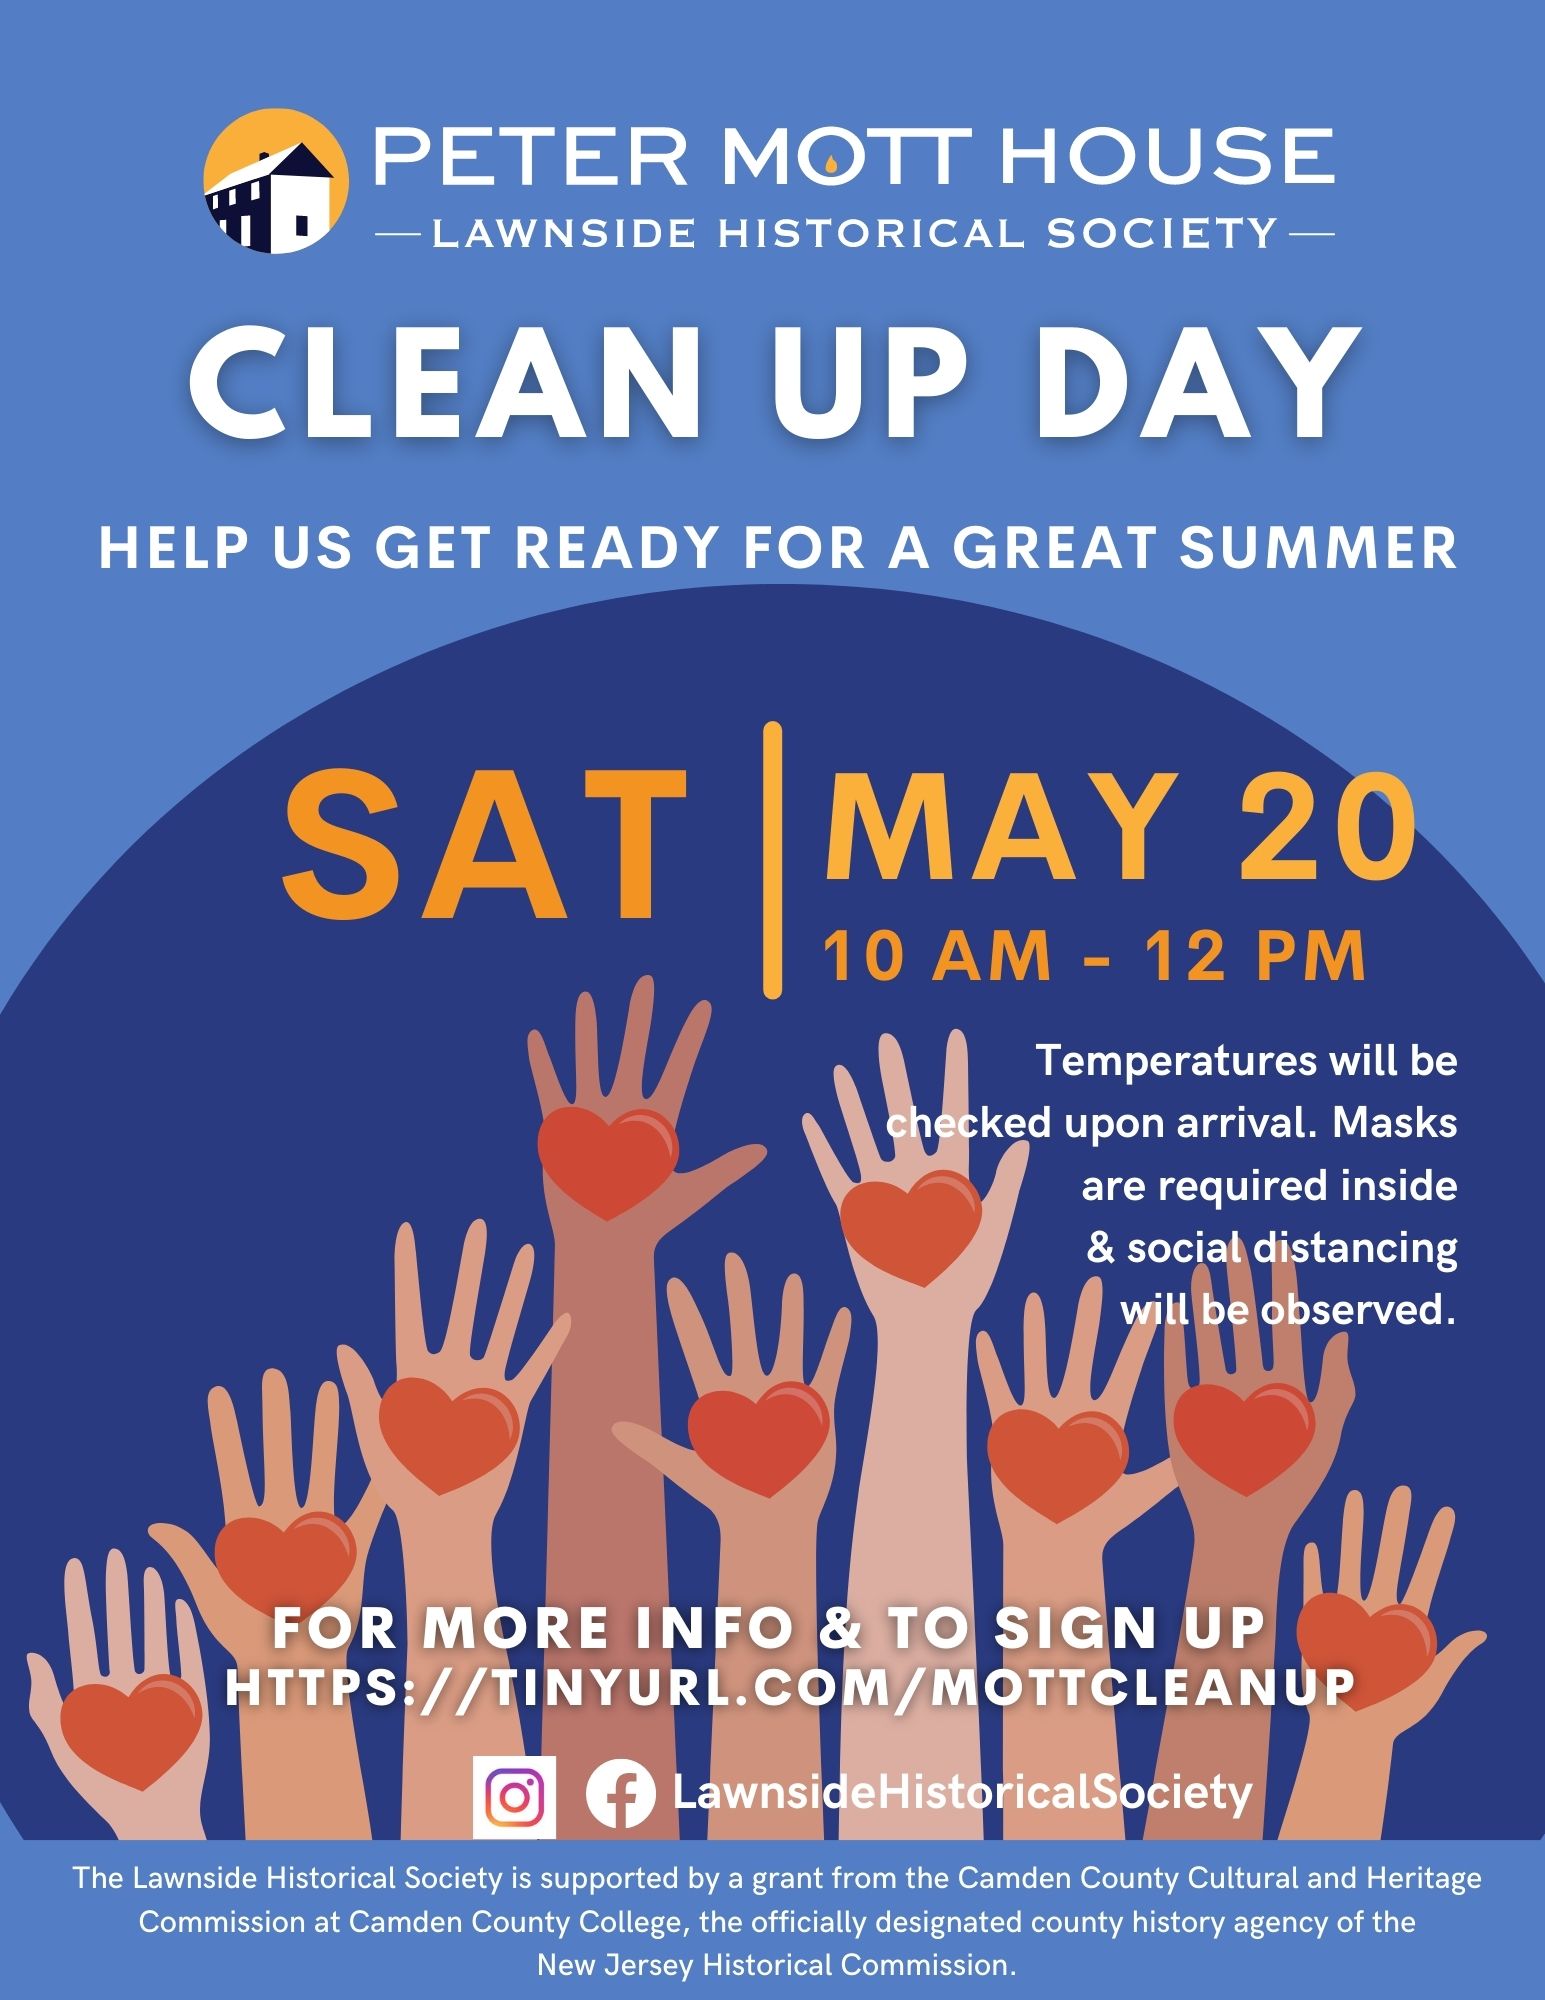 Join us for Clean Up Day on Sat, May 20, 2023 from 10 AM - 12 PM